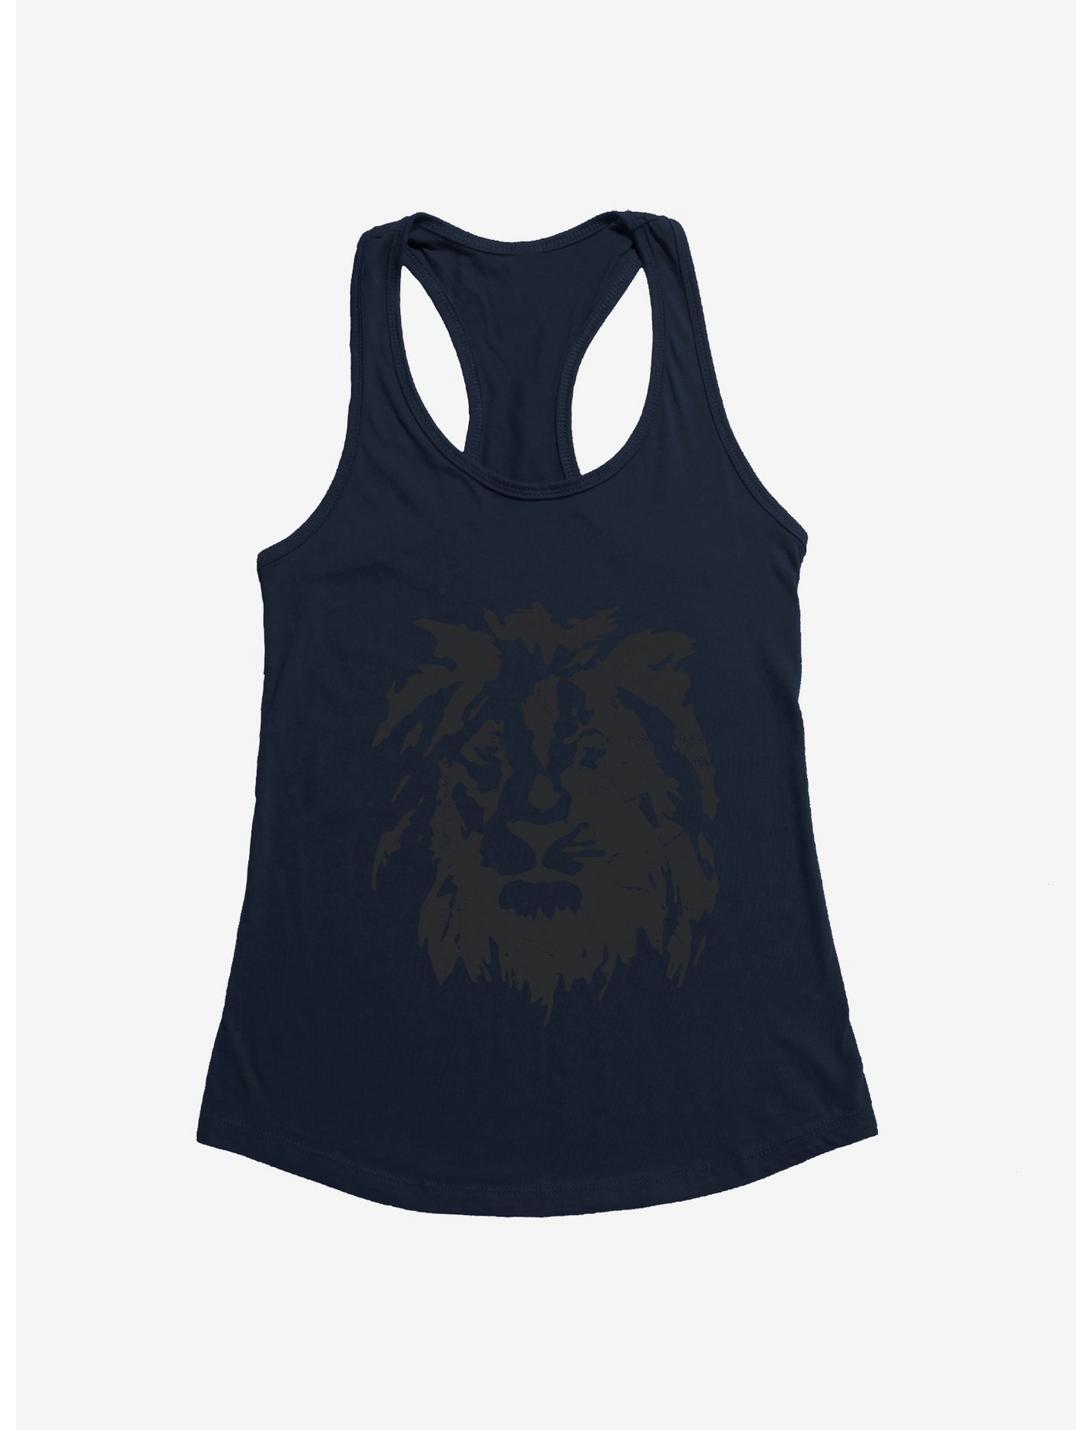 iCreate Lion Face Distressed Girls Tank, , hi-res